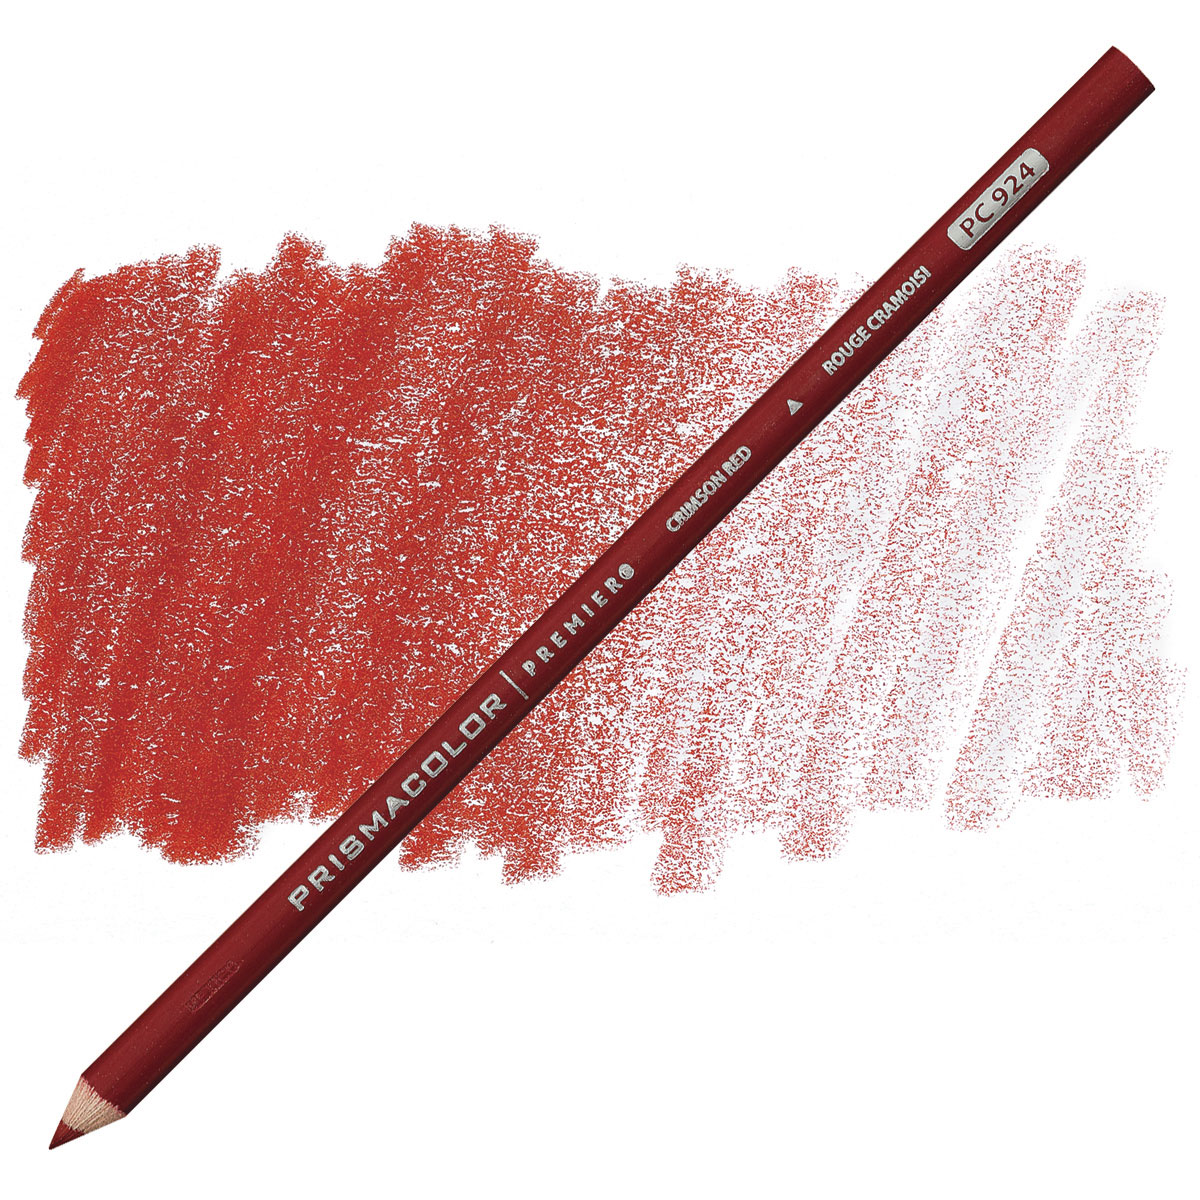 New Pack of 12 Prismacolor Verithin Colored Pencil Crimson Red, 